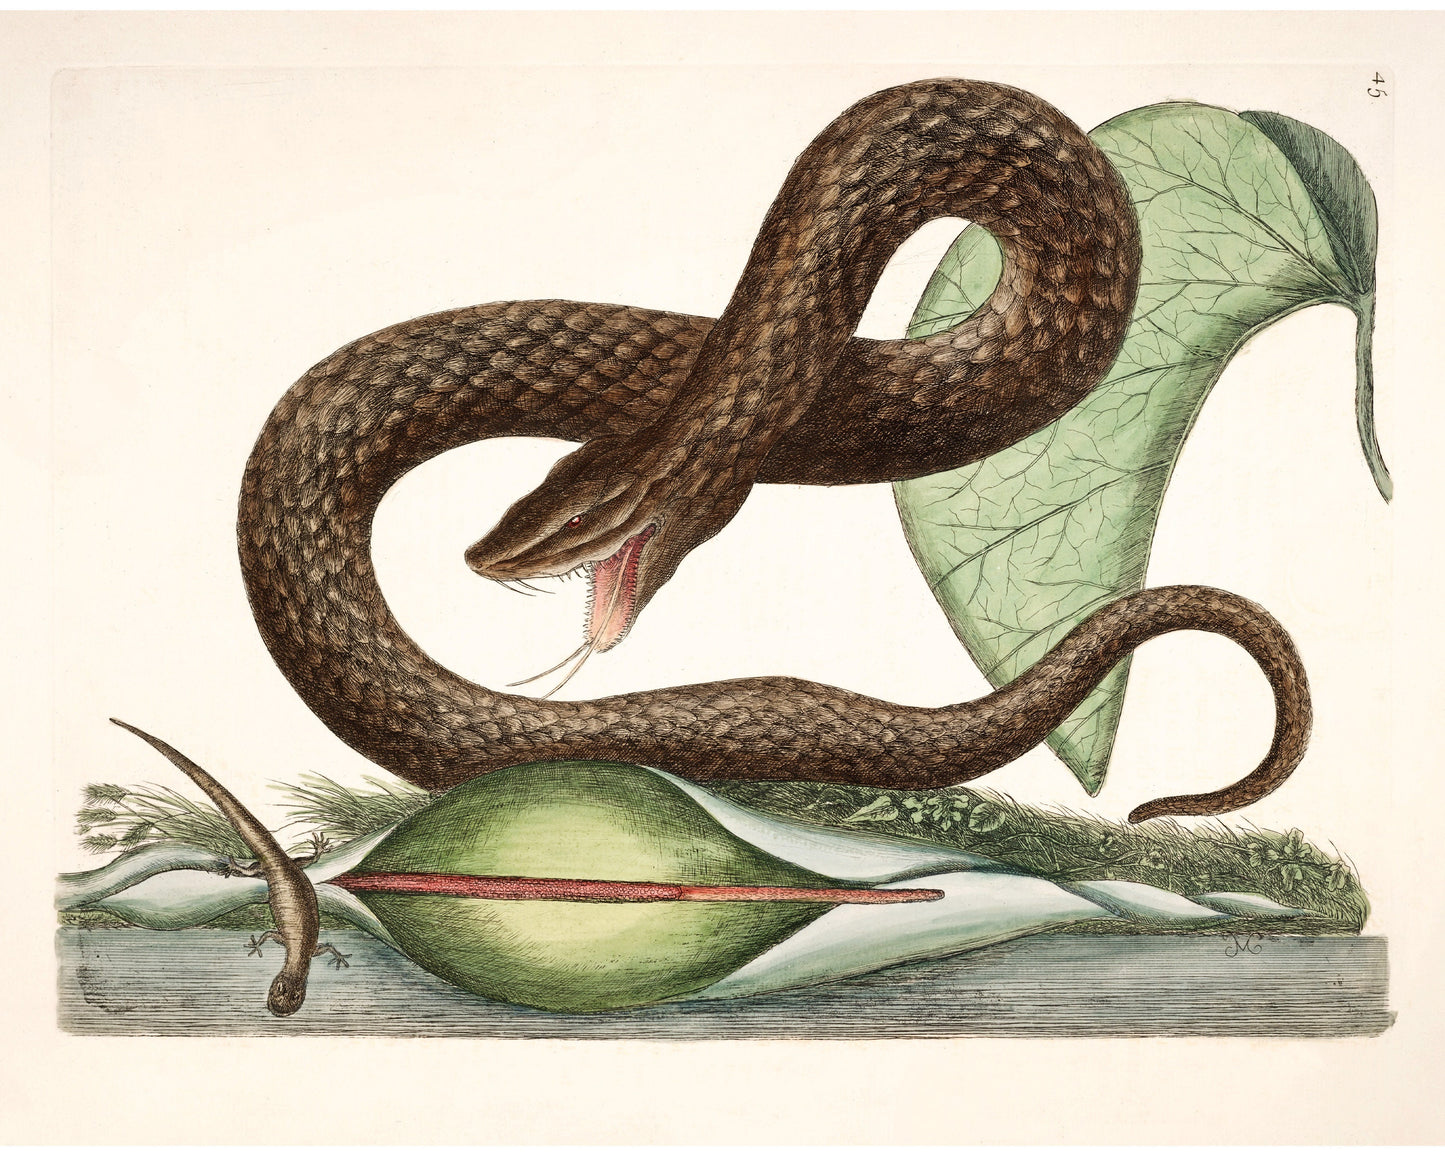 Viper snake, lizard and arum lily print | Antique Mark Catesby | Natural history of Carolina art | Modern vintage décor | Eco-friendly gift